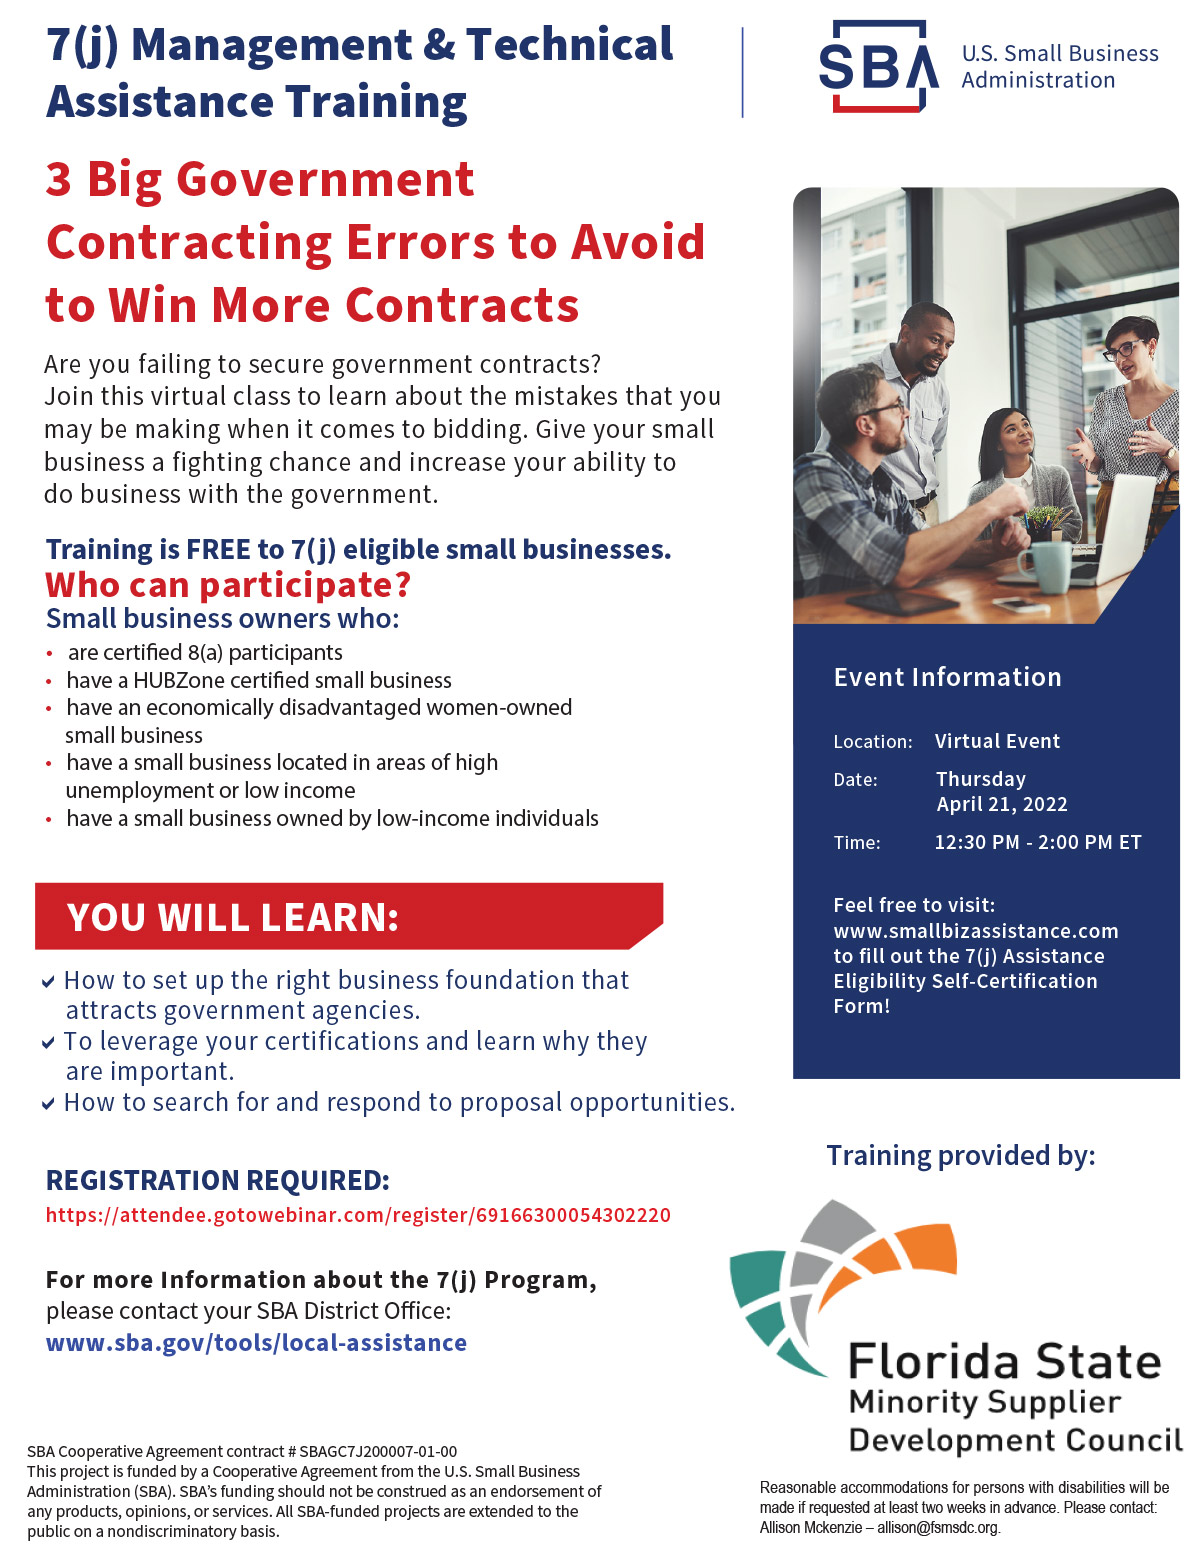 3 Big Government Contracting Errors to Avoid to Win More Contracts